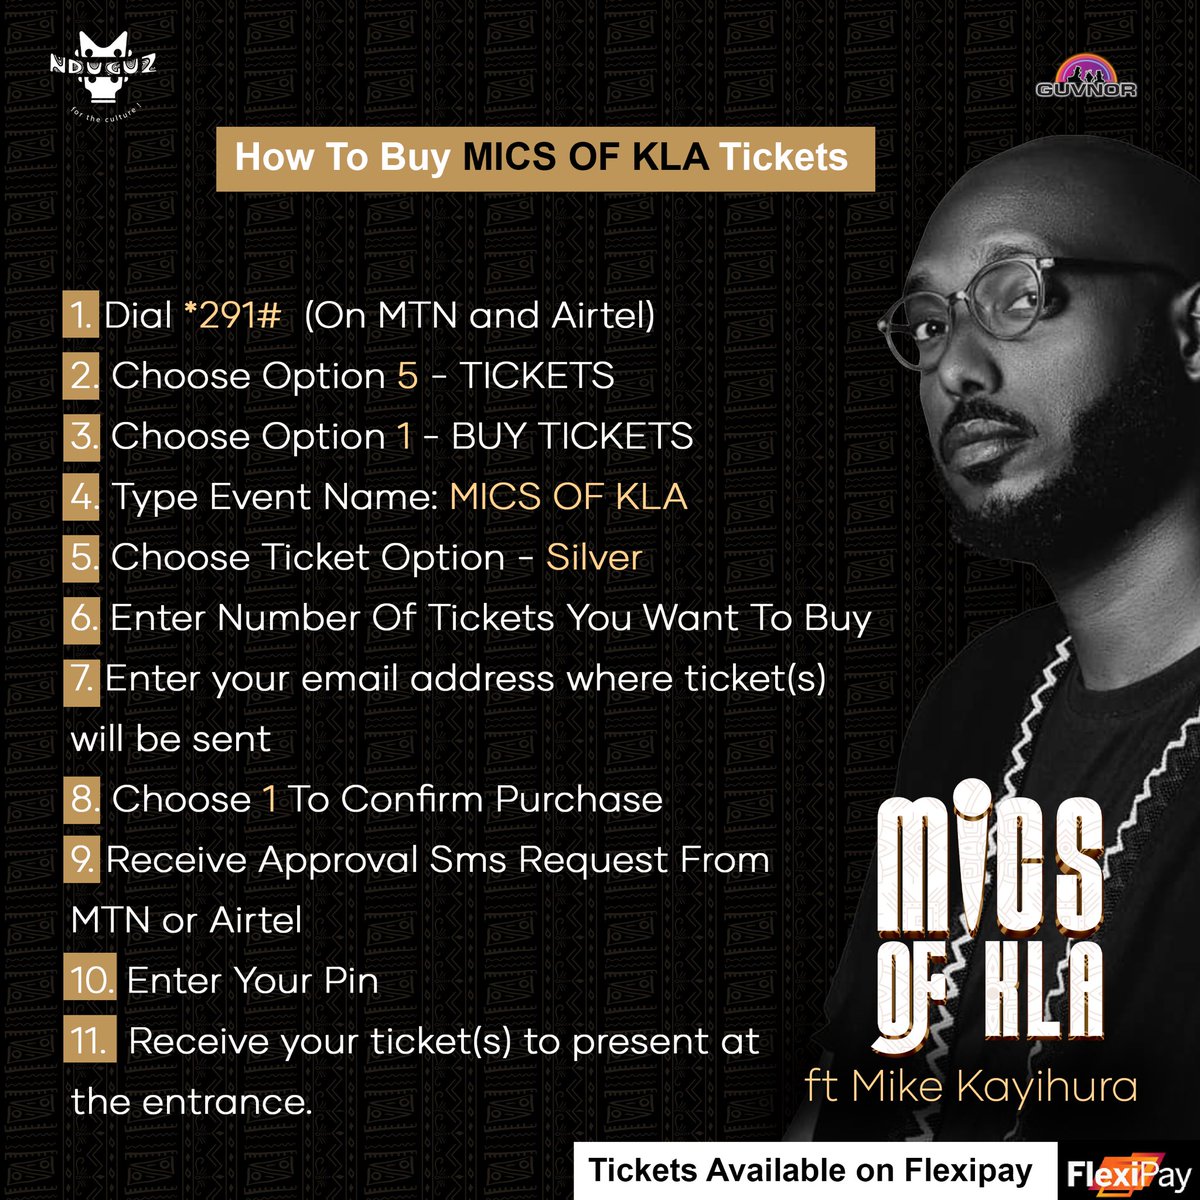 You notice the song in this video is Anytime by Mike Kayihura who is going to be performing live at Guvnor on 24th May. Here is how you can get your tickets. #MicsOfKla || #MikeInGuvnor